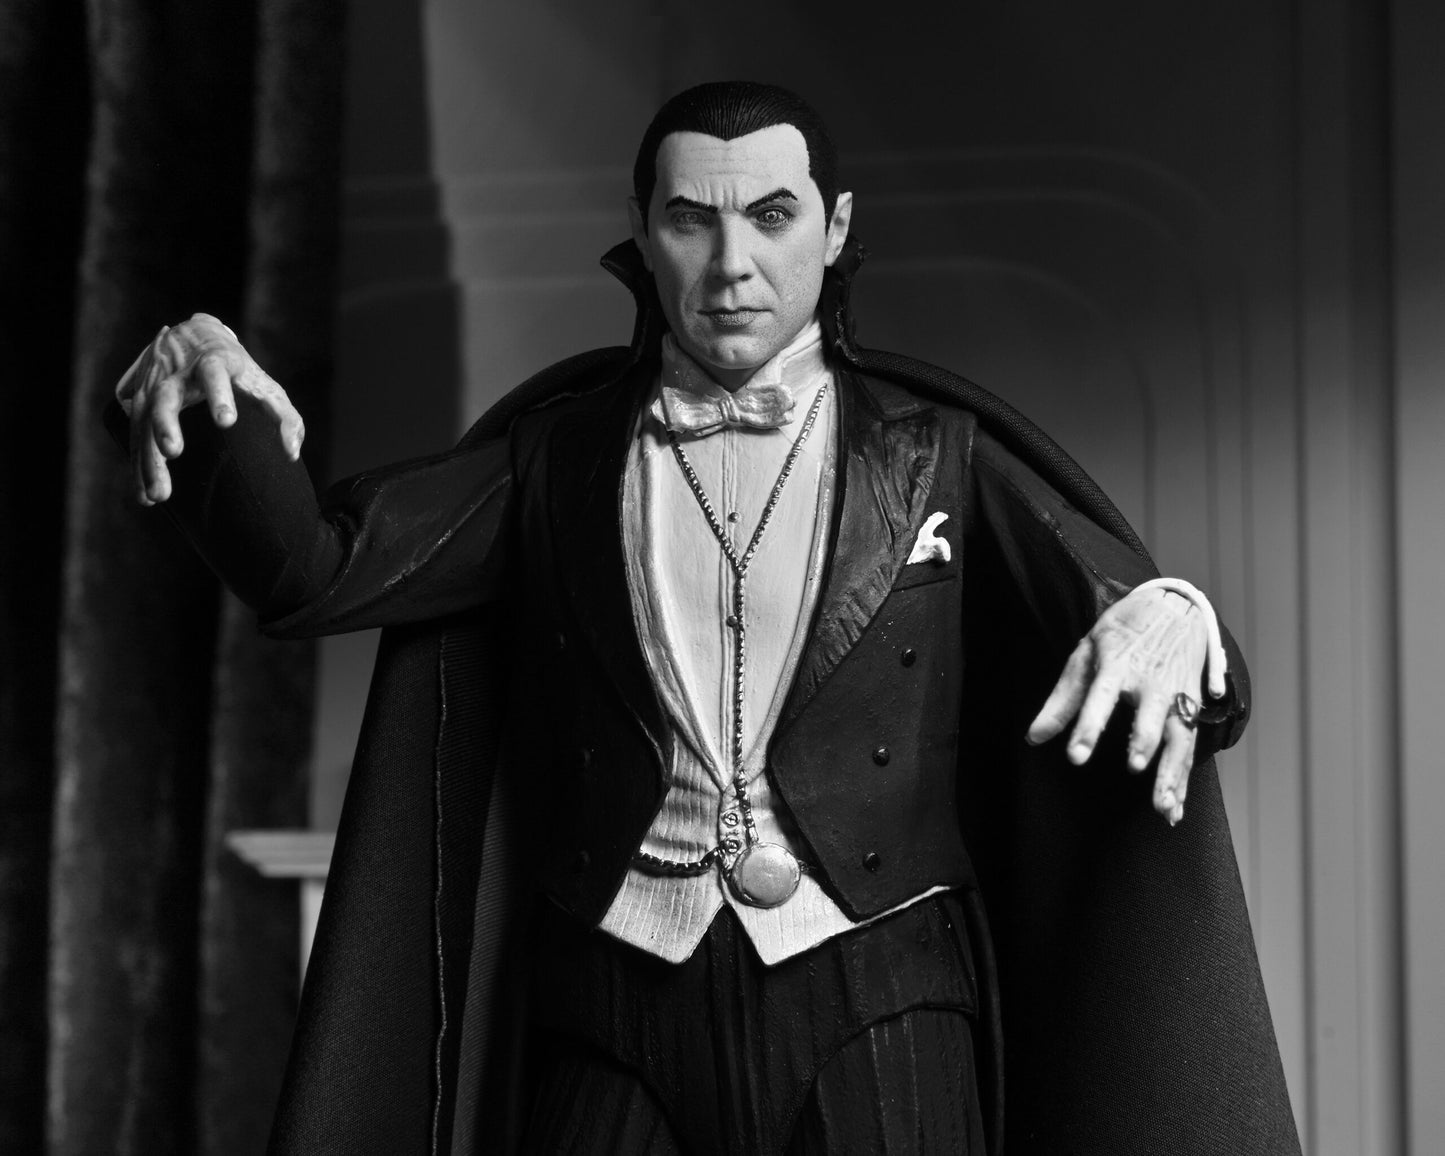 Universal Monsters 7” Scale Action Figure – Ultimate Dracula (Carfax Abbey)